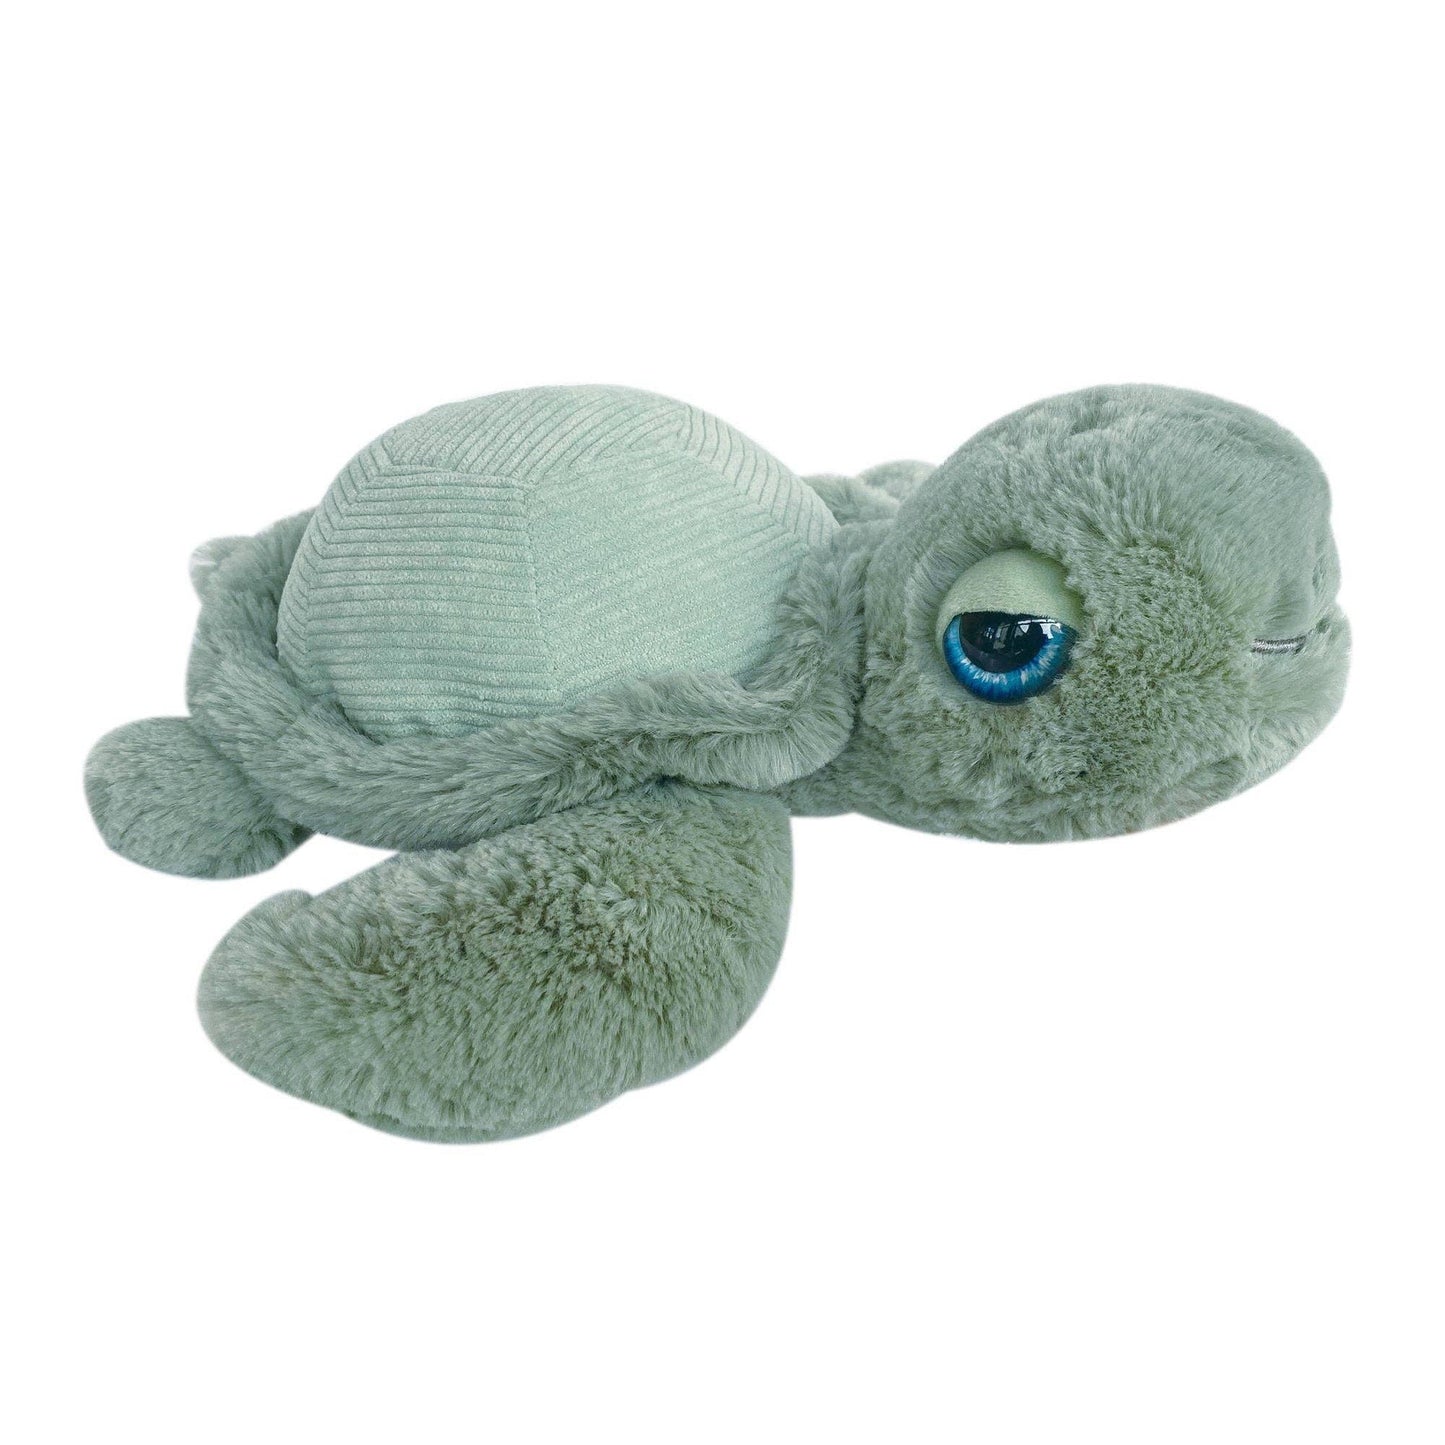 Tyler Turtle Soft Toy